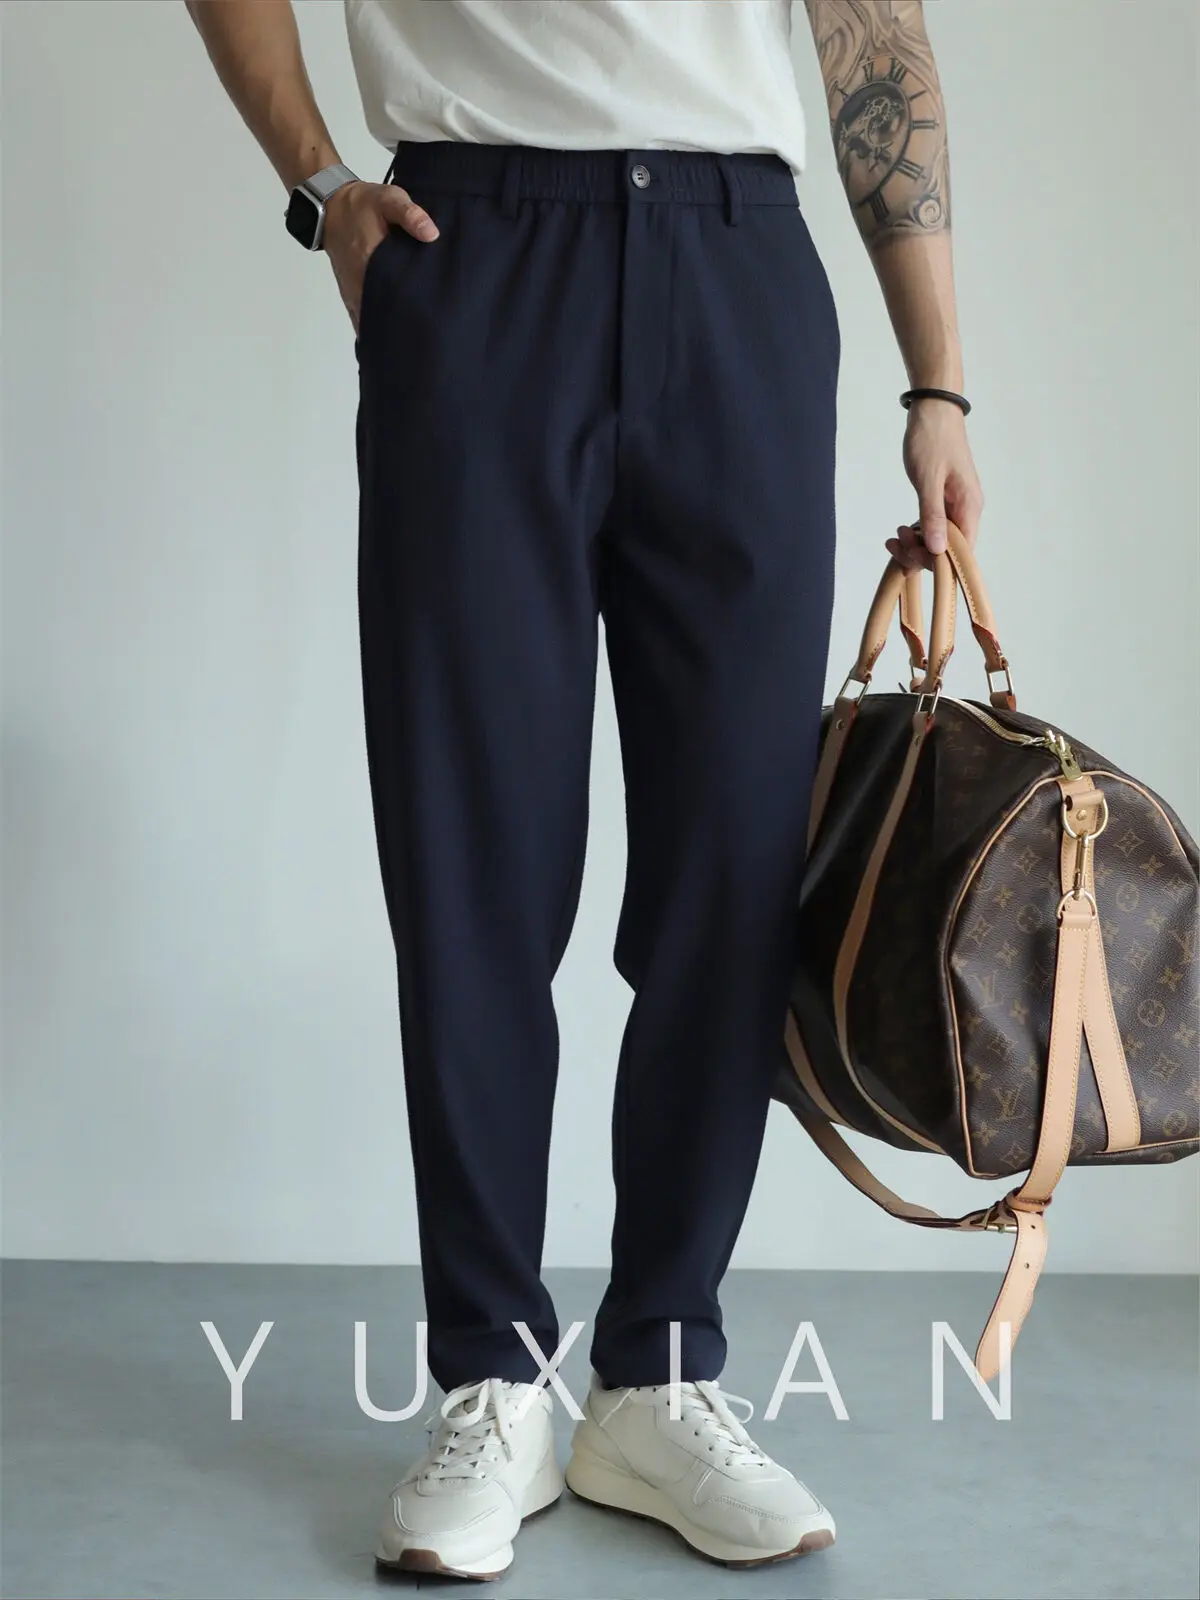 

YUXIAN Cool And Wrinkle Resistant Tapered Cropped Pants With BuBBle Wrap